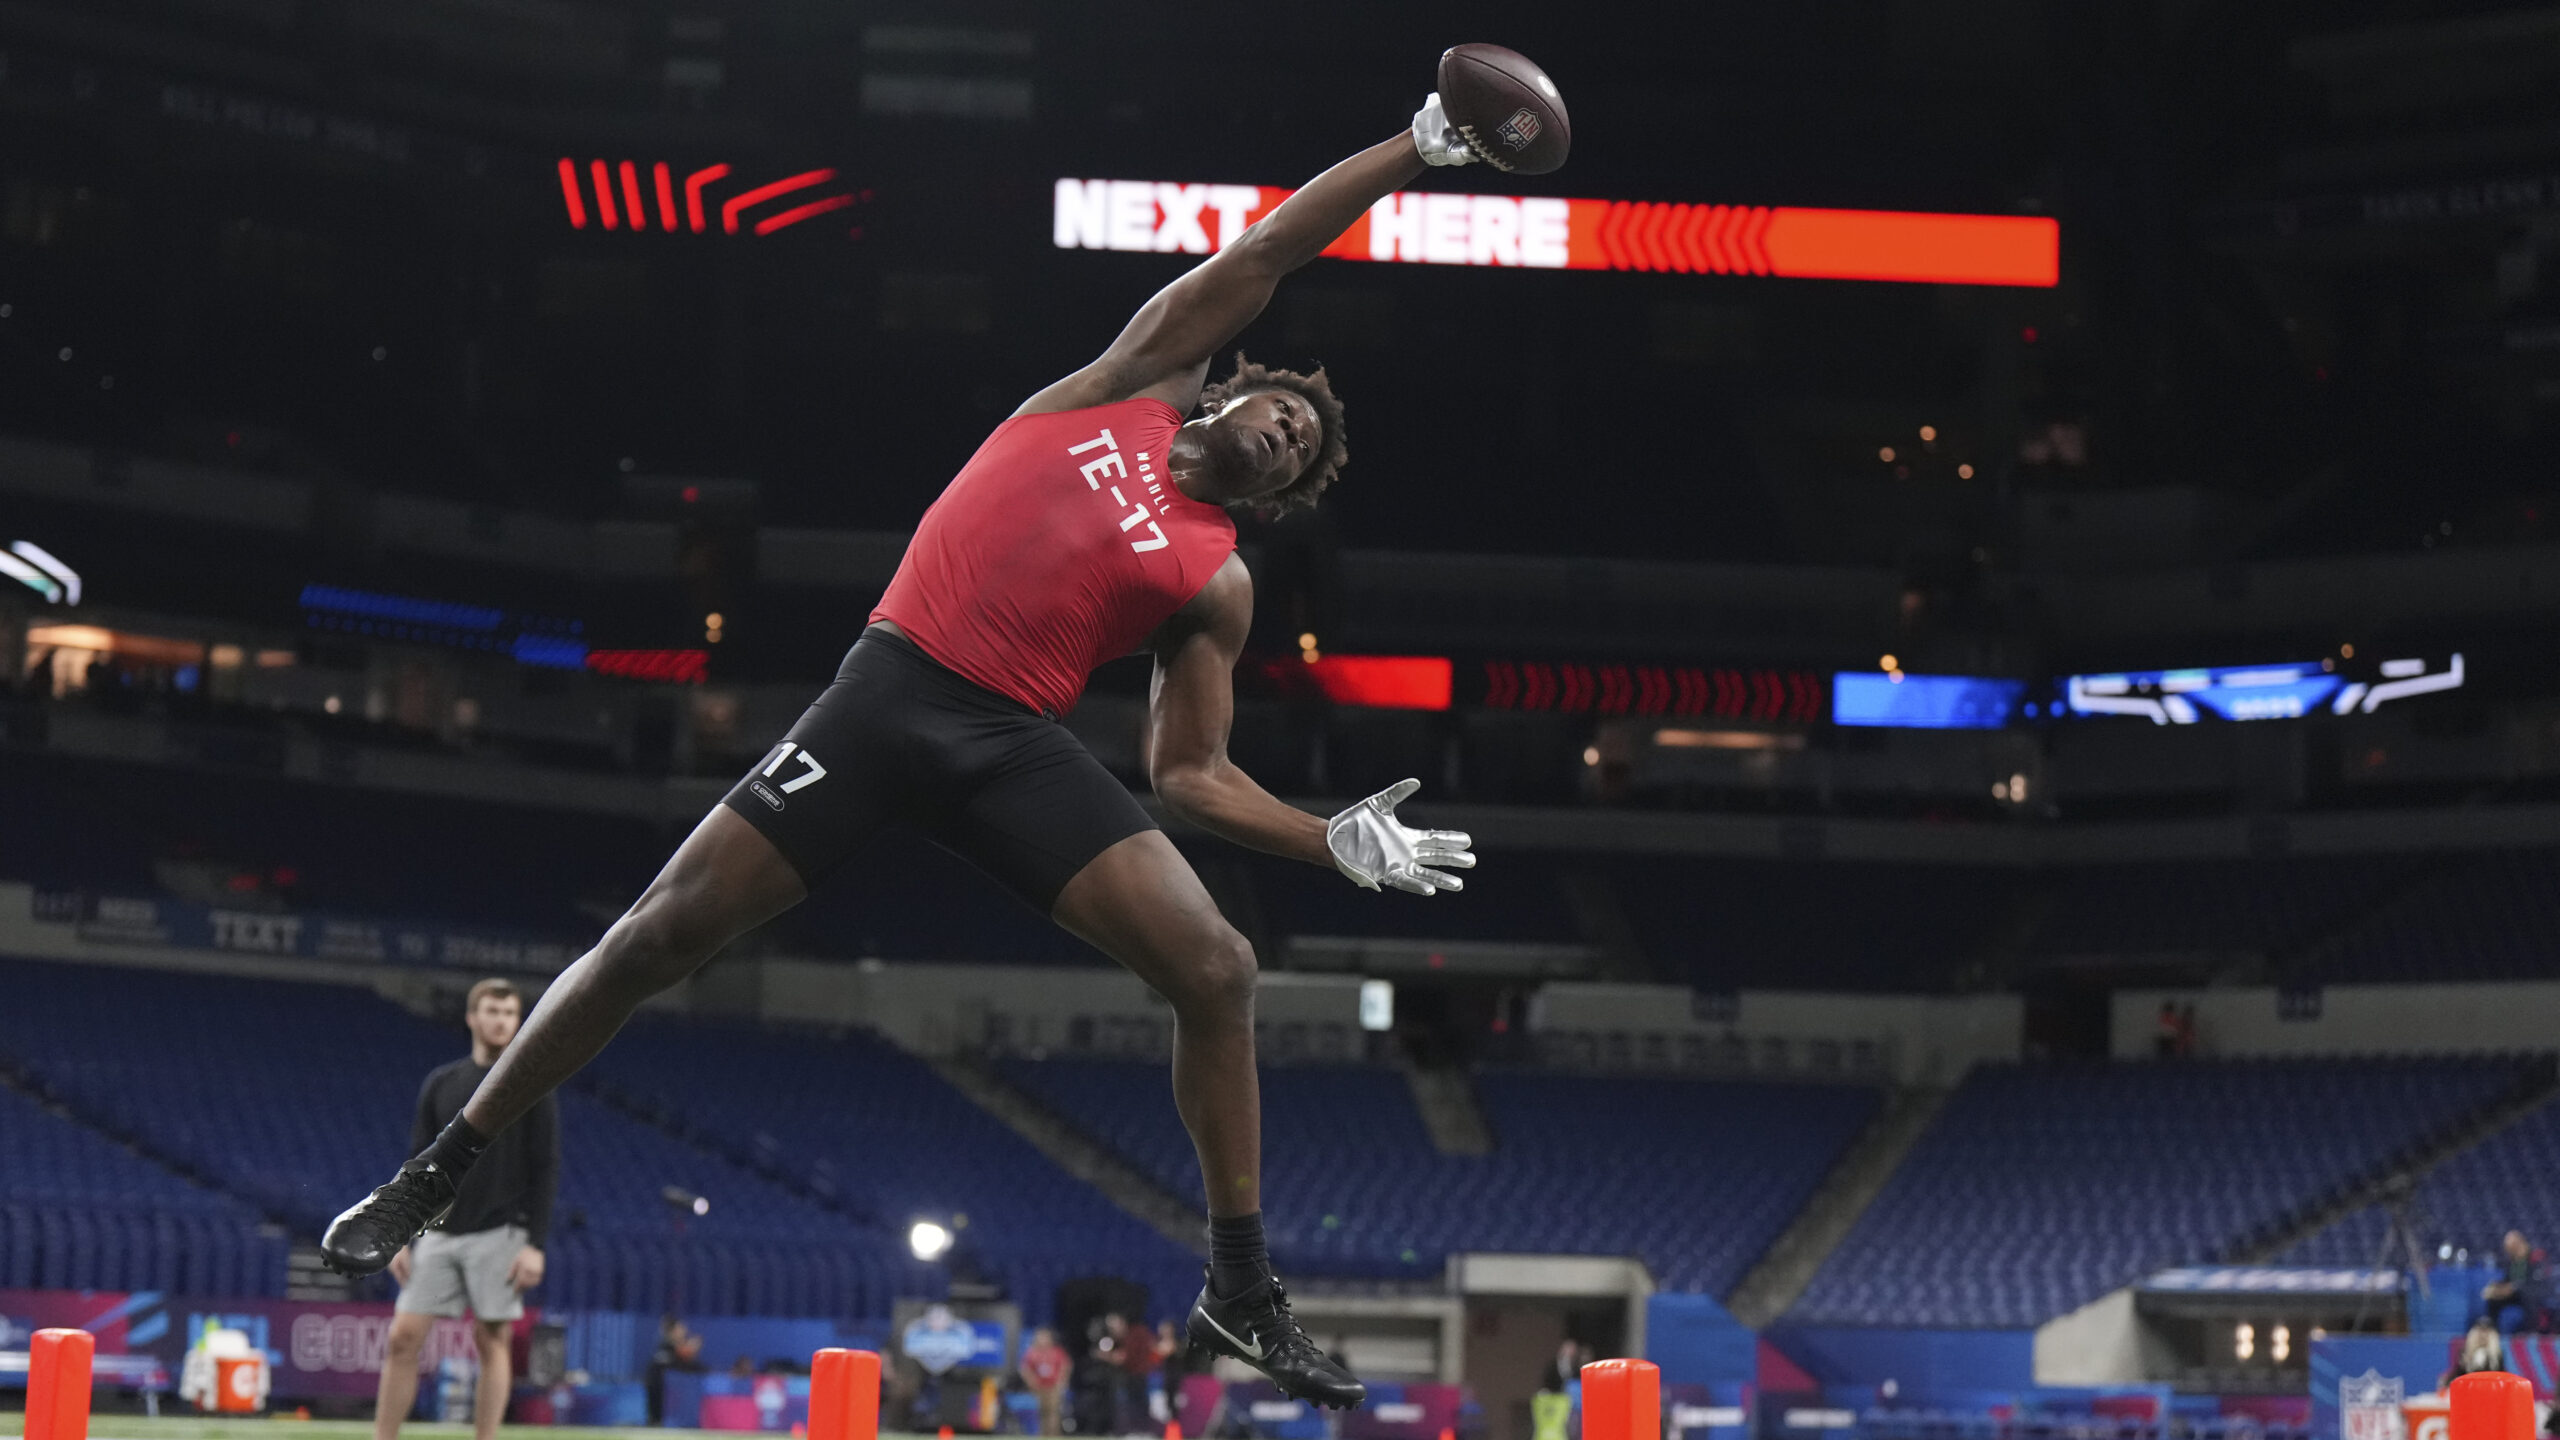 2023 NFL Draft: Ranking 11 Biggest Freak Athletes at This Year’s Combine